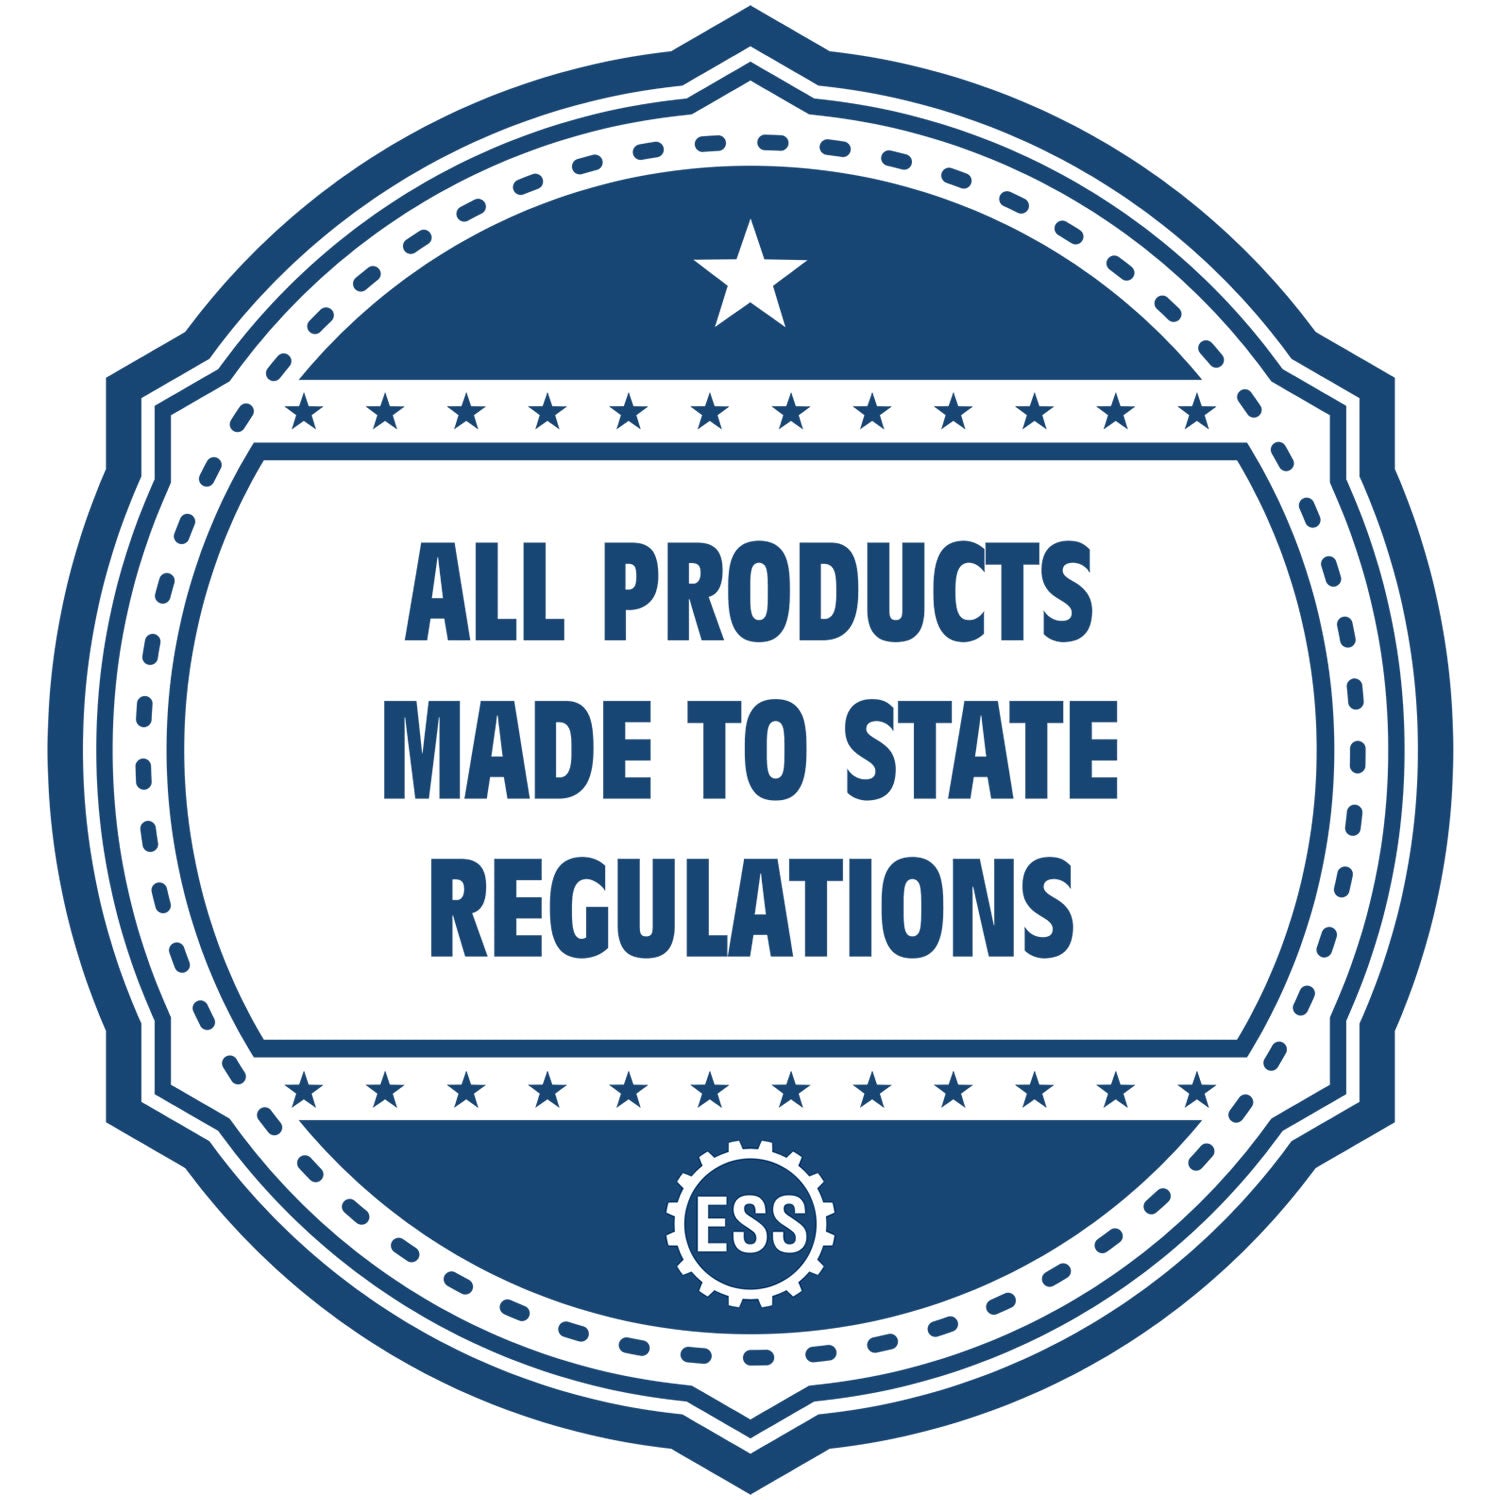 An icon or badge element for the Heavy Duty Cast Iron Colorado Engineer Seal Embosser showing that this product is made in compliance with state regulations.